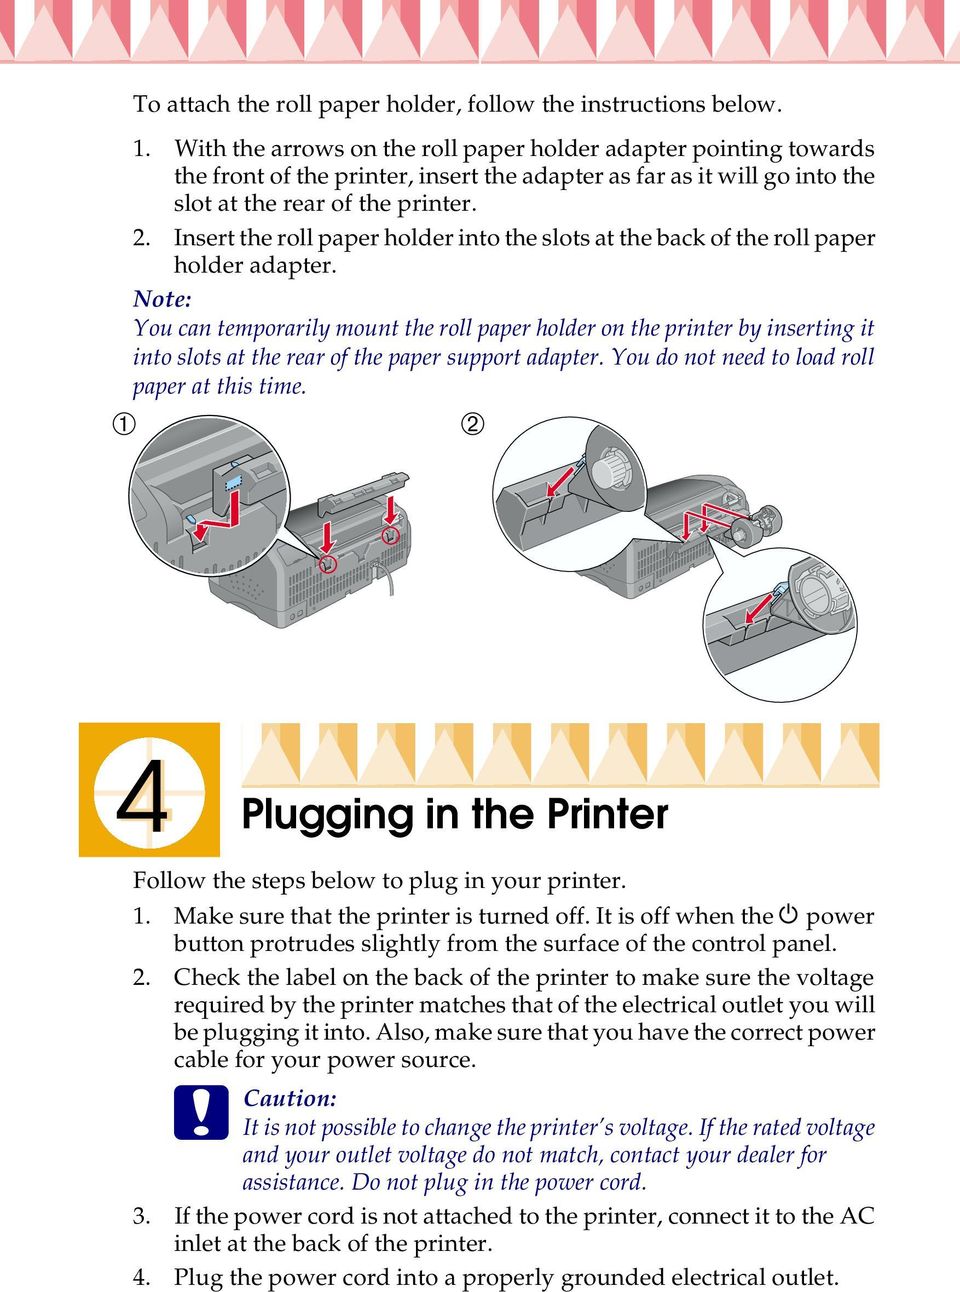 Insert the roll paper holder into the slots at the back of the roll paper holder adapter.